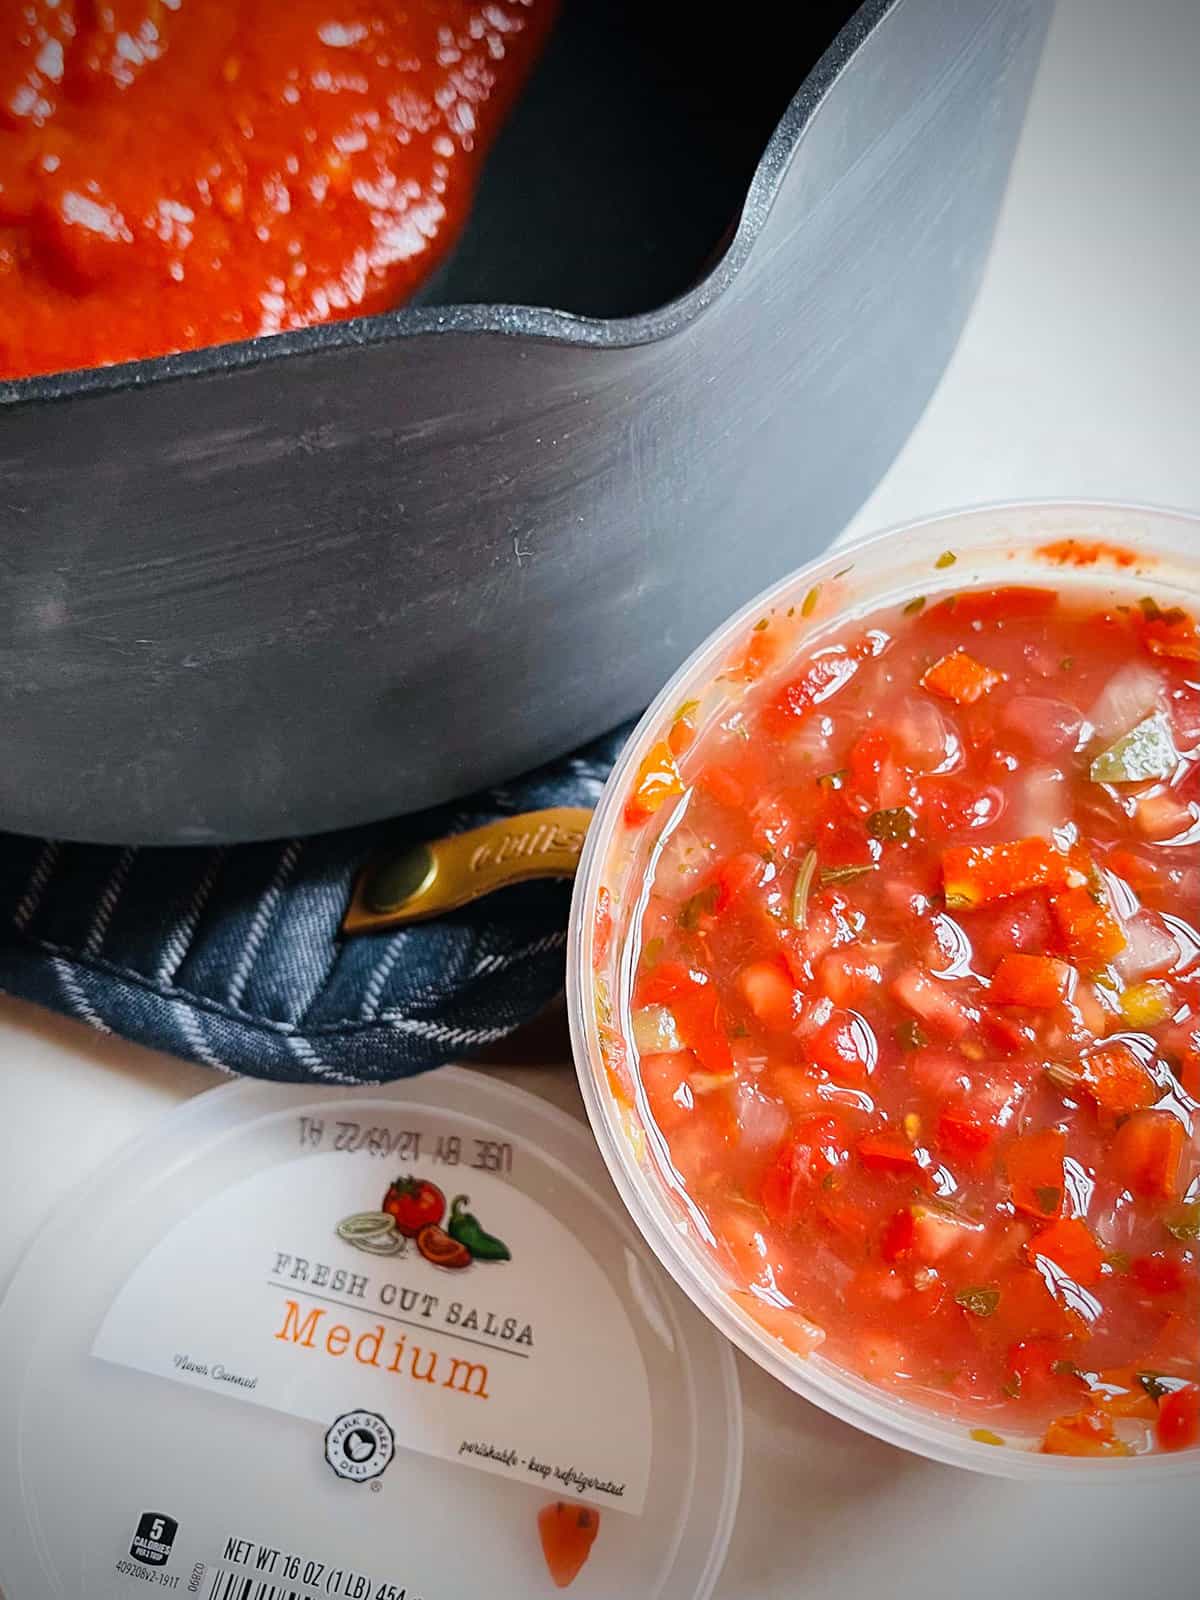 A soup pot with a container of fresh cut salsa next to it.